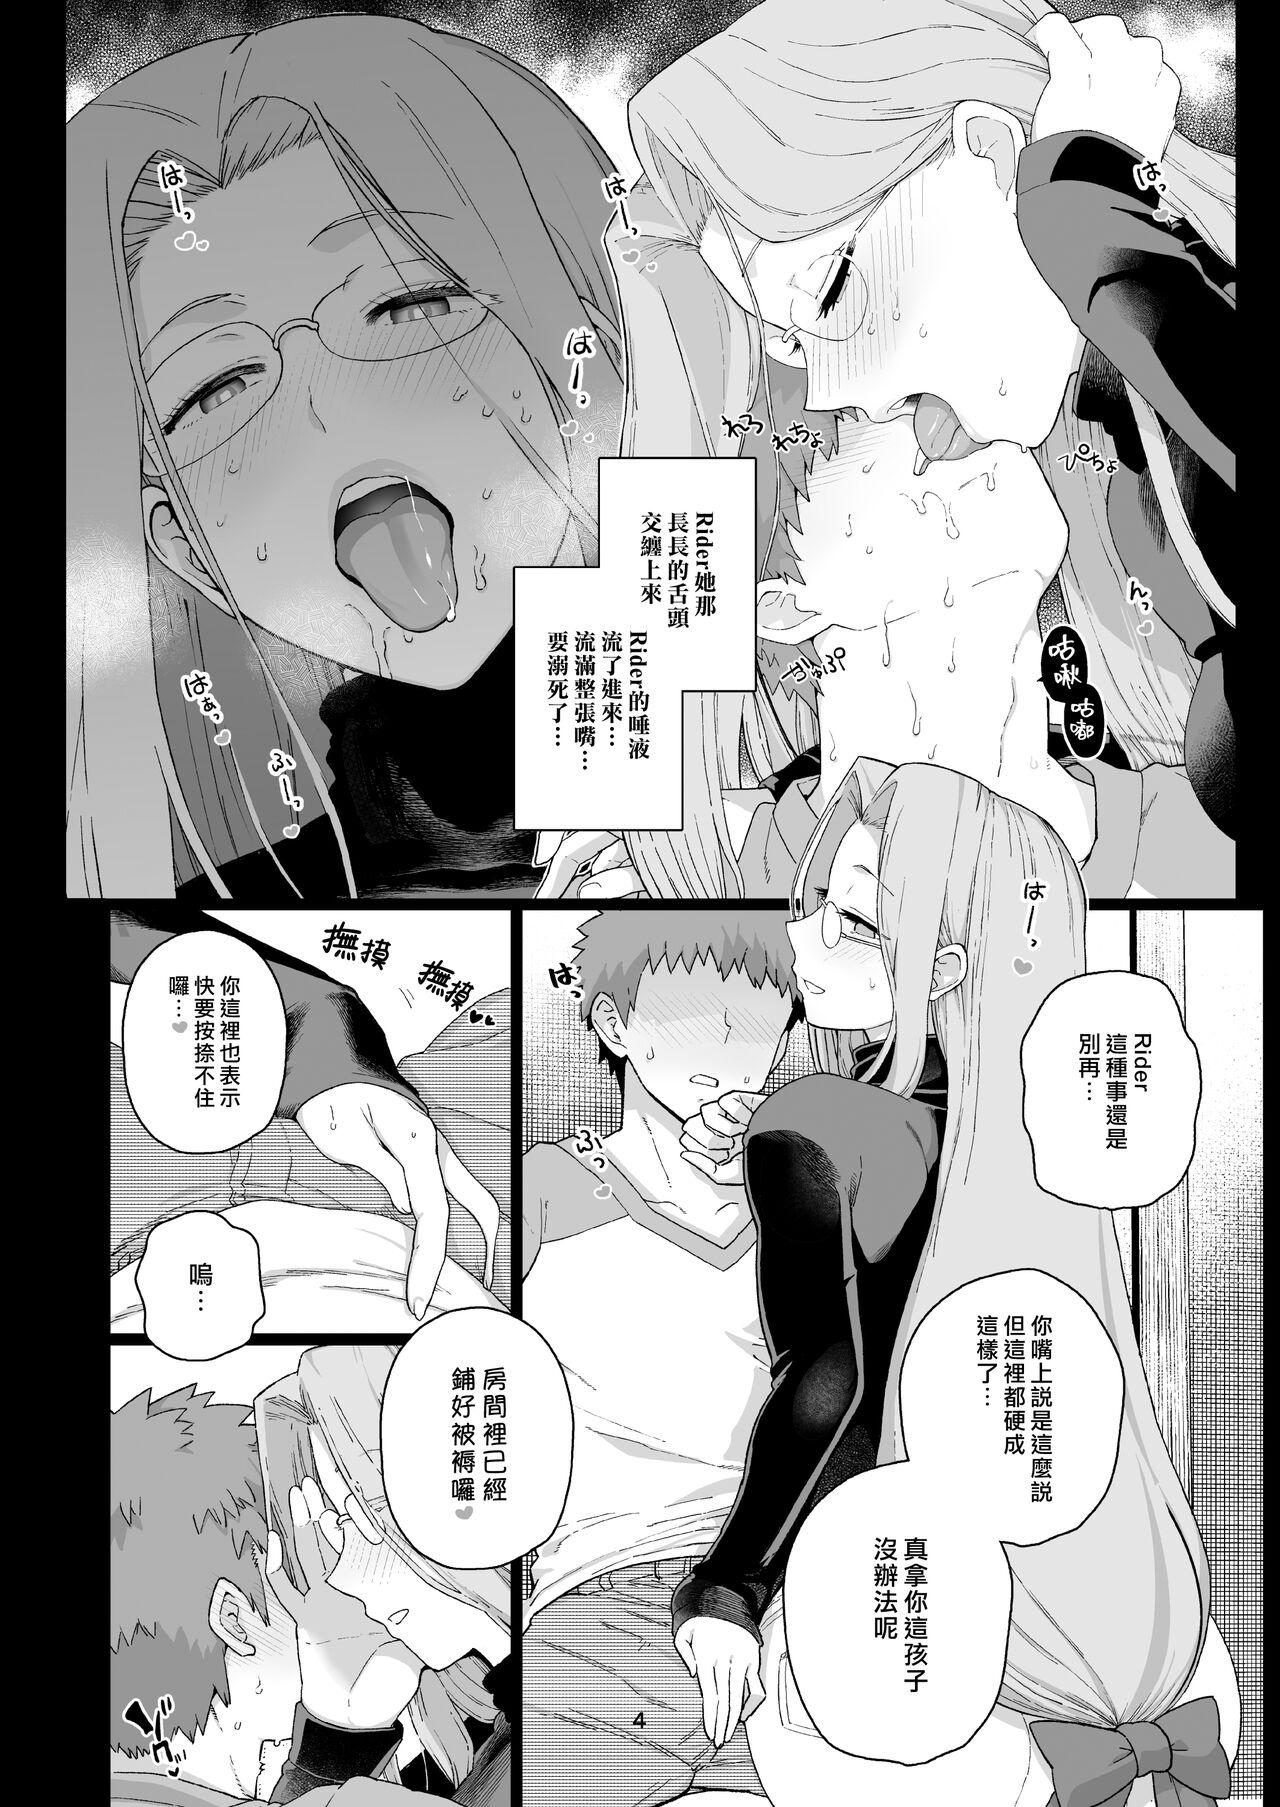 Foursome Rider-san no Tsumamigui - Fate stay night Crazy - Page 5